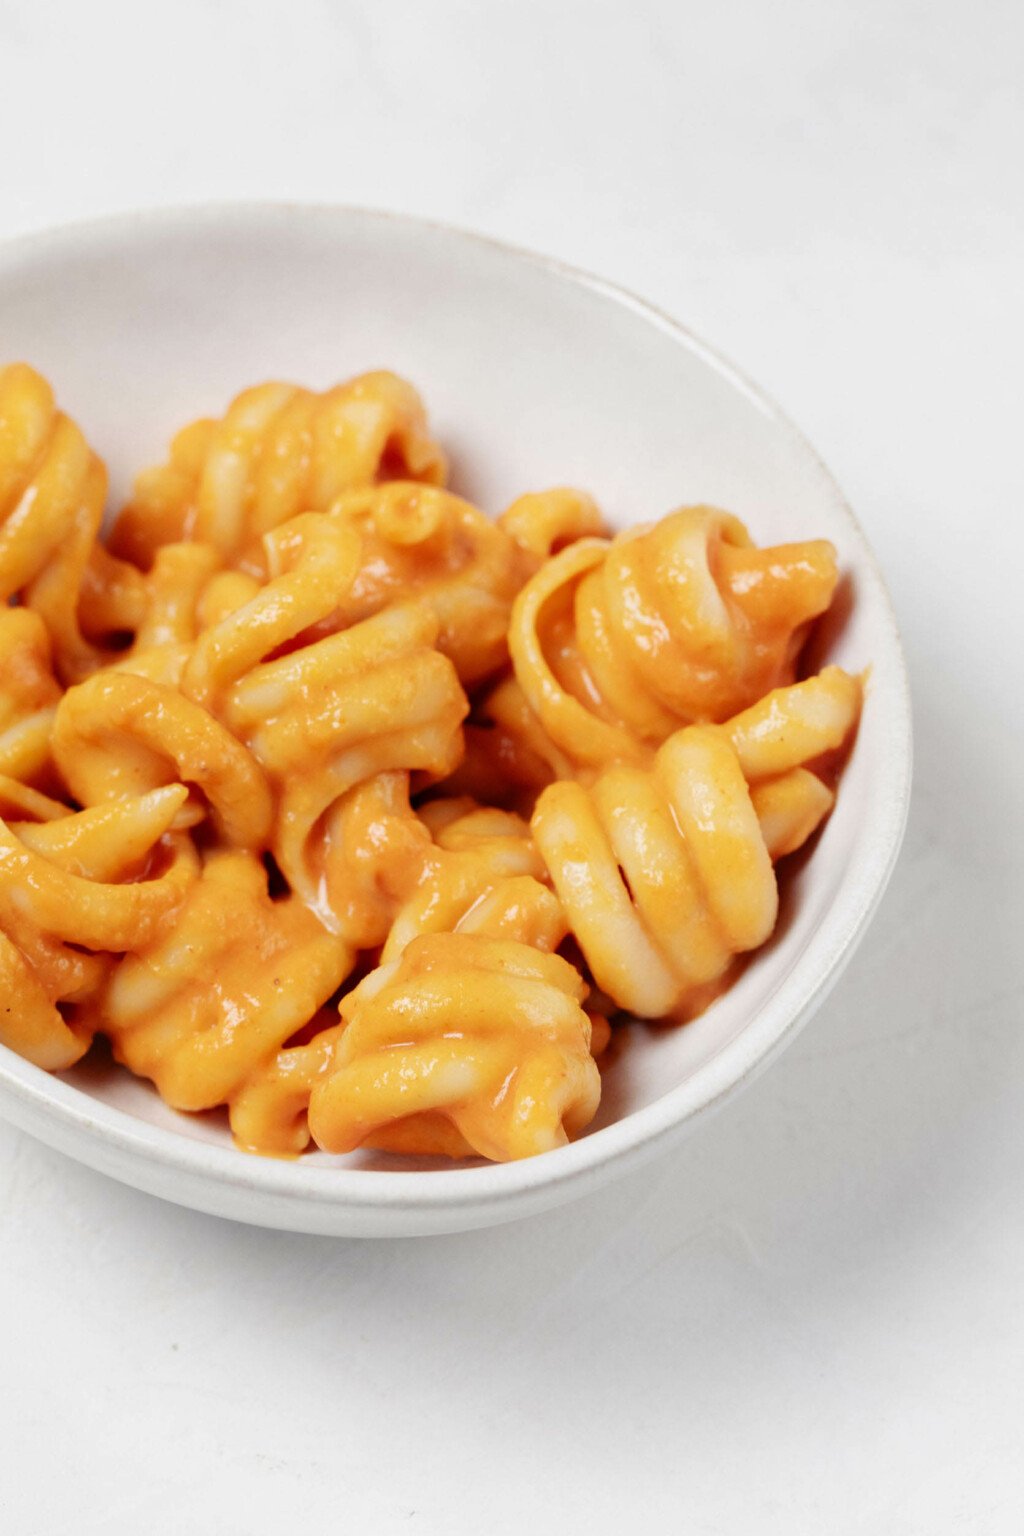 A close up image of a bowl with corkscrew shaped pasta and a creamy, orange, pumpkin-based sauce.